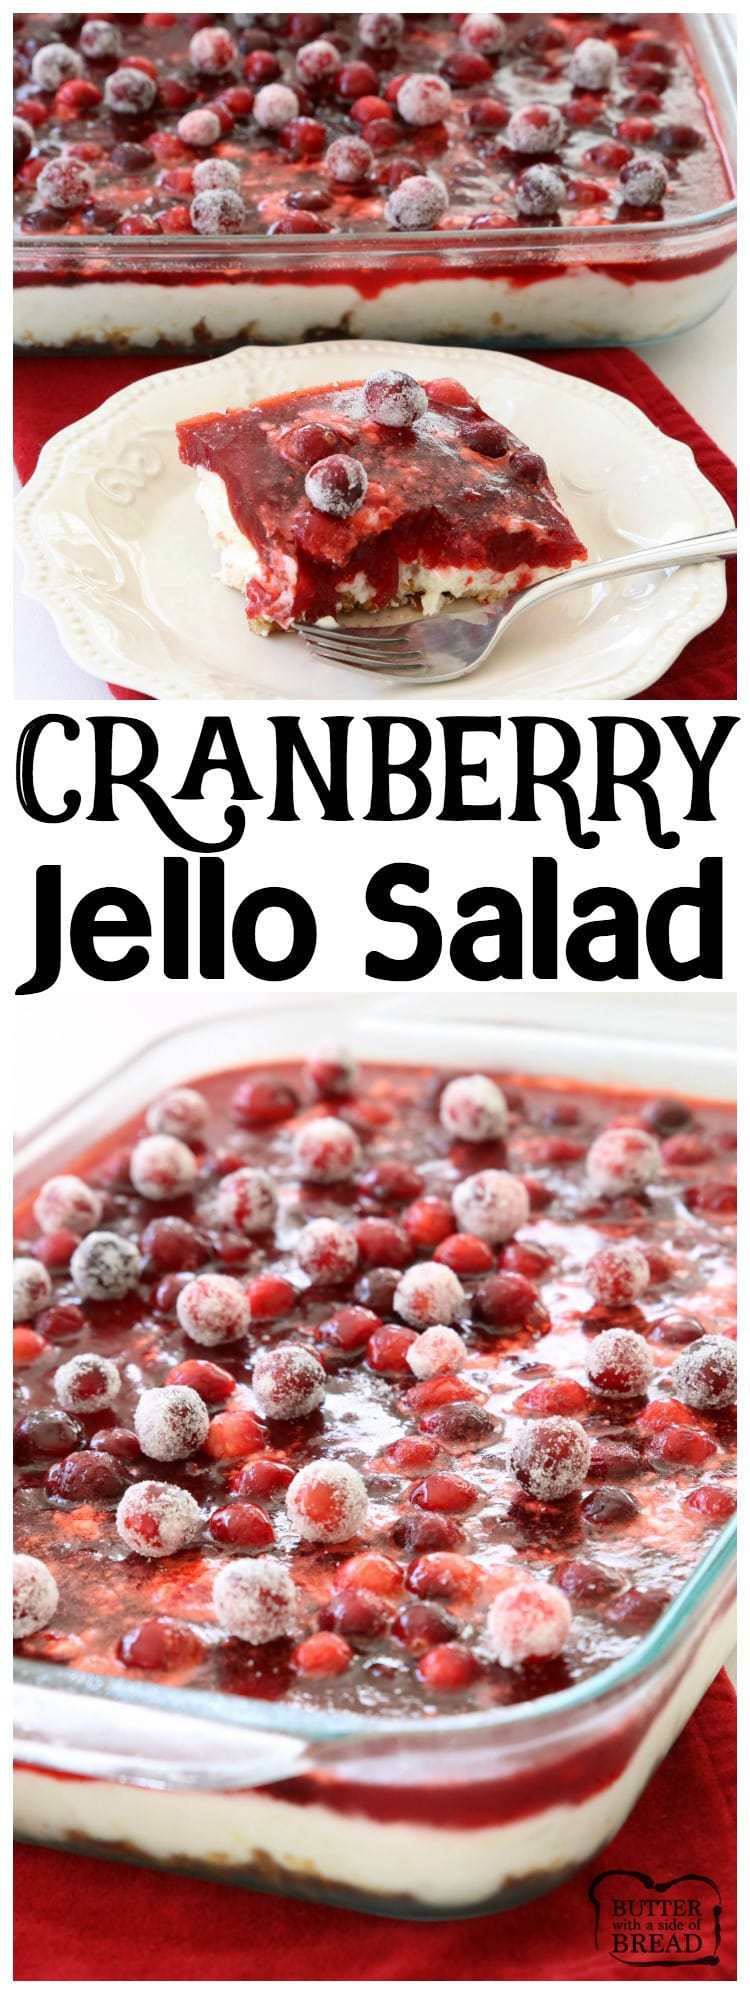 Cranberry Jello Salad made with 3 festive, delicious layers of pretzels, pudding, cranberries & Jello! Impressive, easy cranberry recipe to add to your holiday meal.